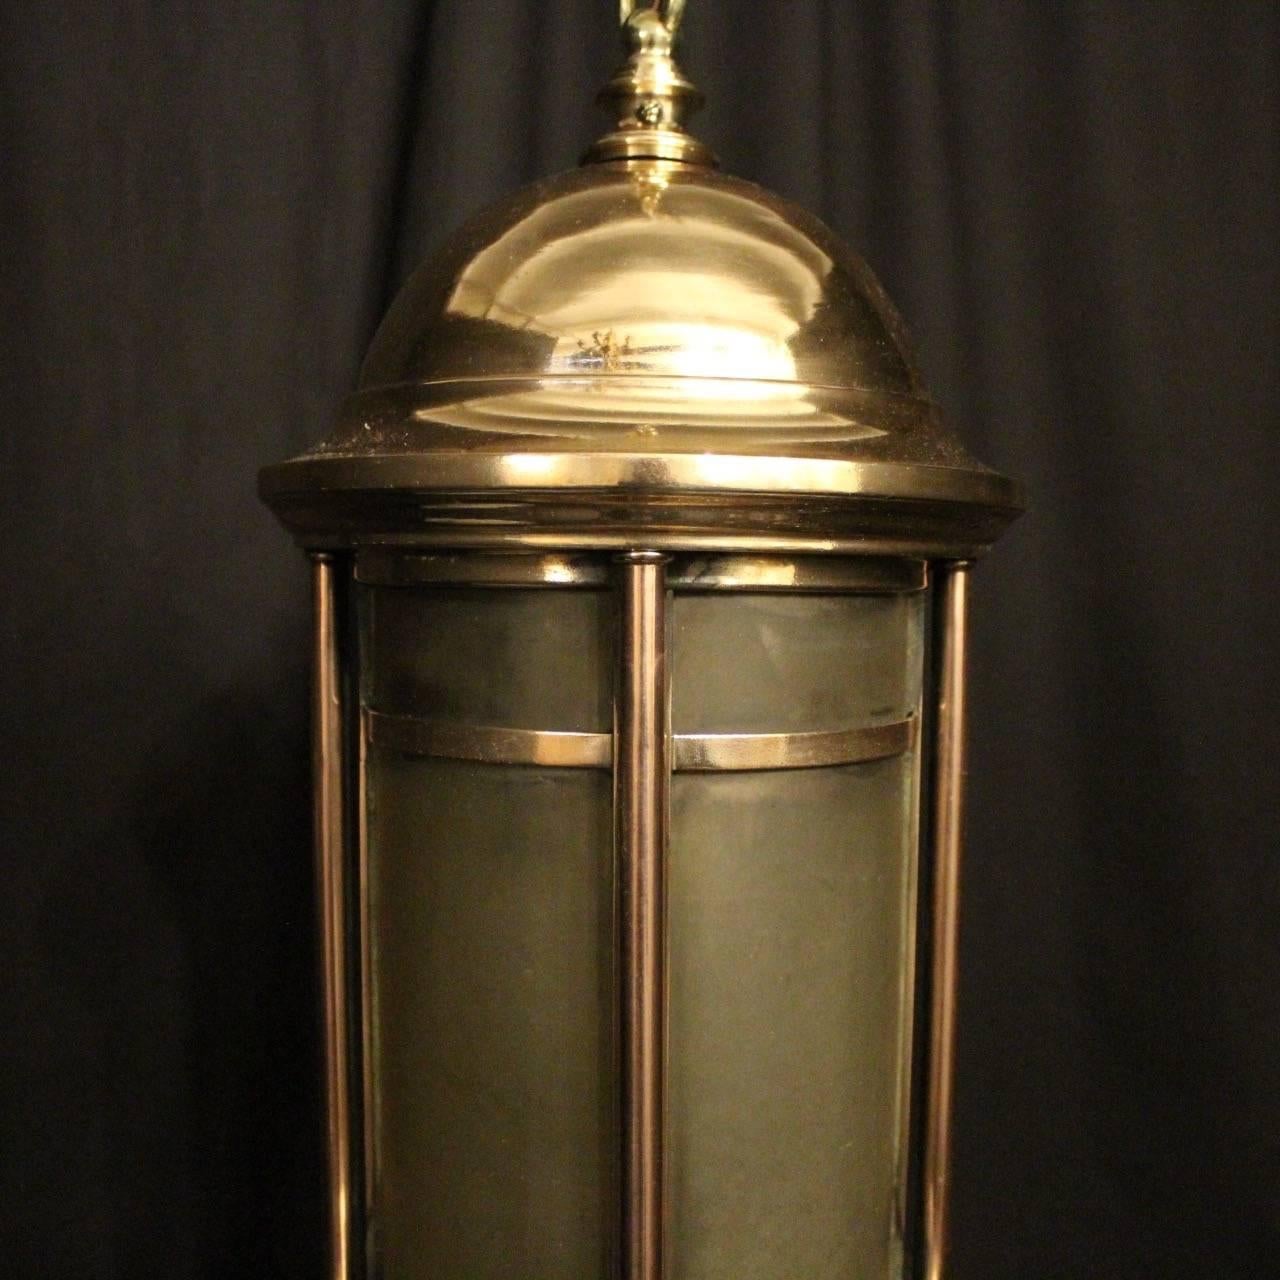 An English single light bronze exterior lantern, the single inverted light fitting surrounded by a single convex etched glass panel and held within a bronze cast framework with domed top and ball terminals, repolished and lacquered, excellent